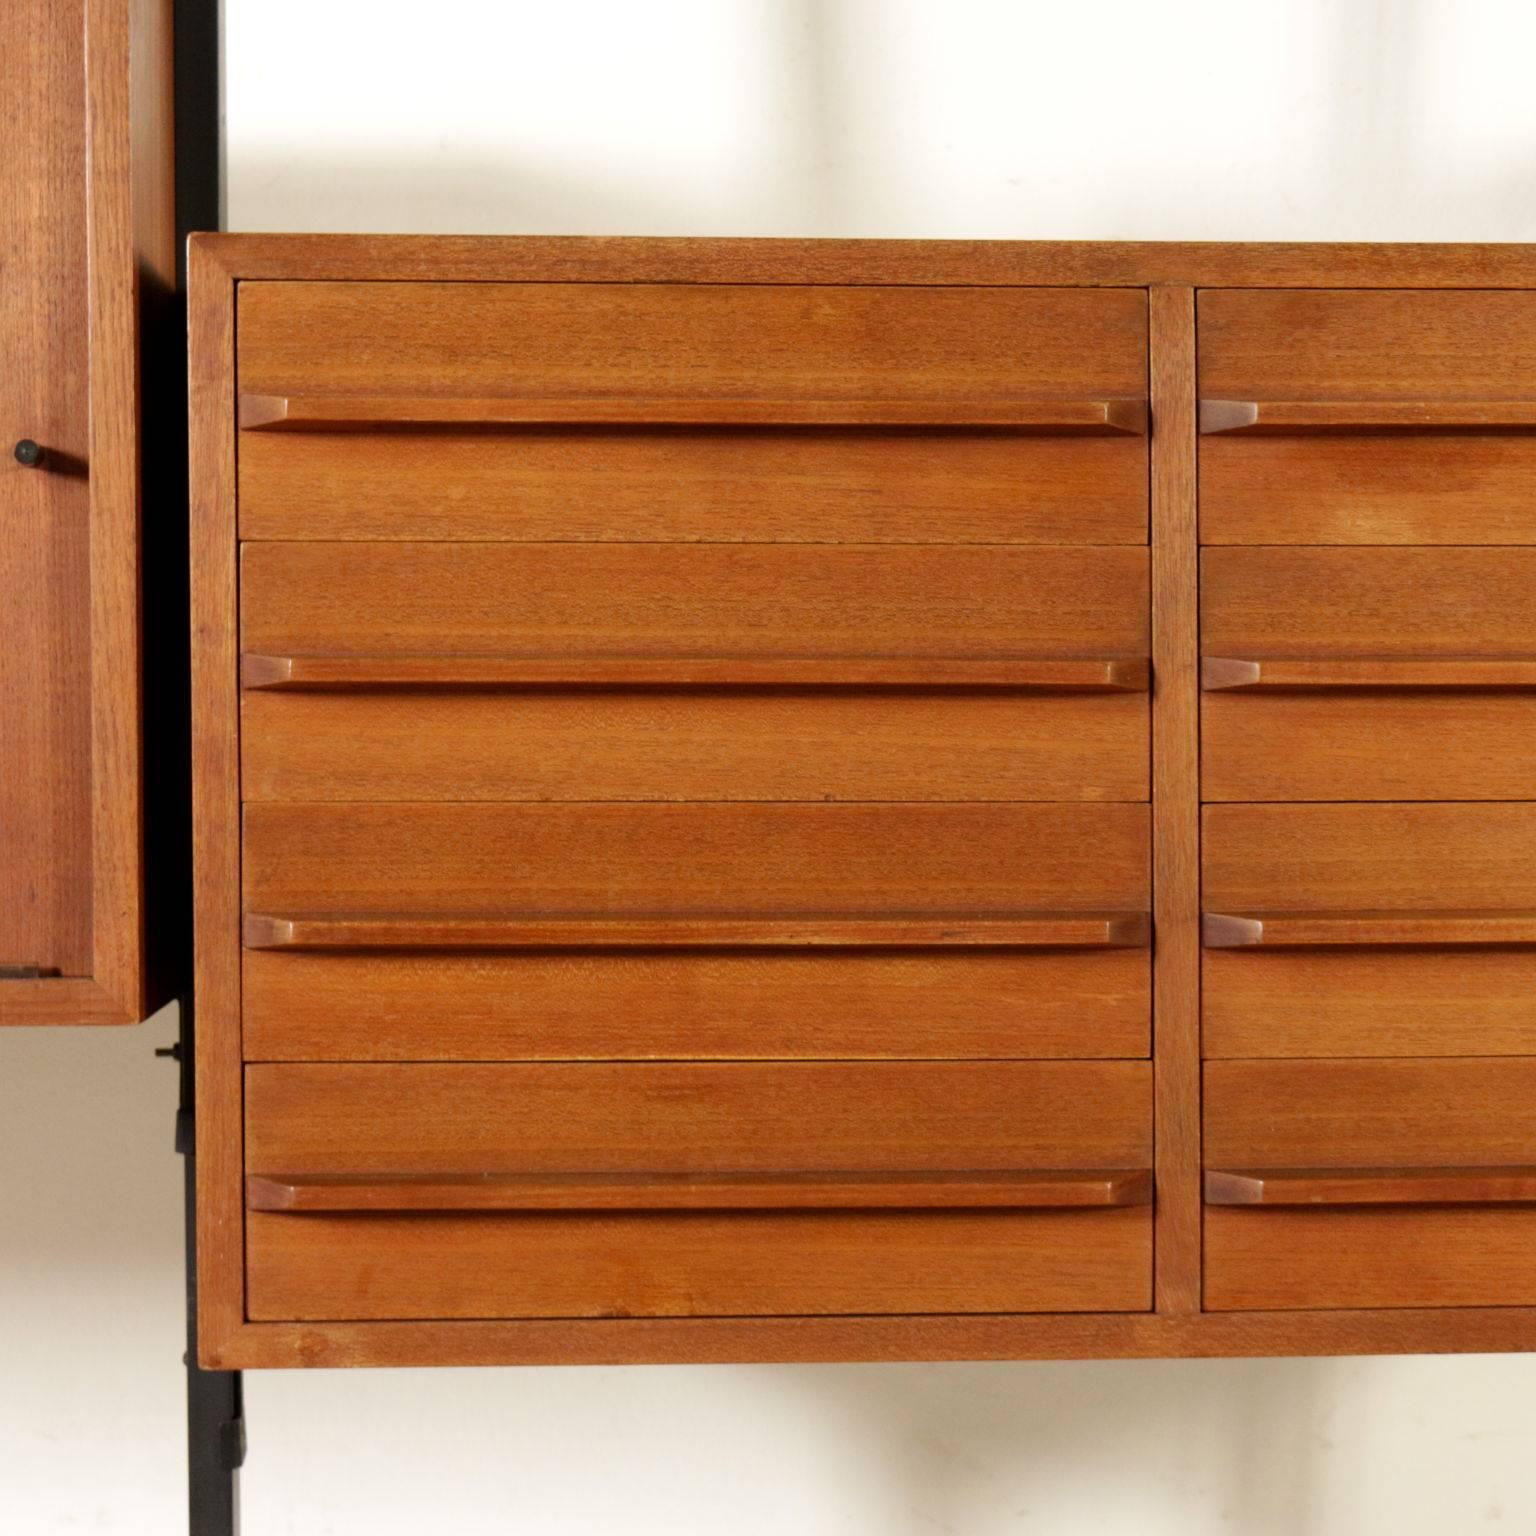 Mid-20th Century Bookcase Designed by Paolo Tilche Teak Veneer Vintage, Italy, 1950s-1960s